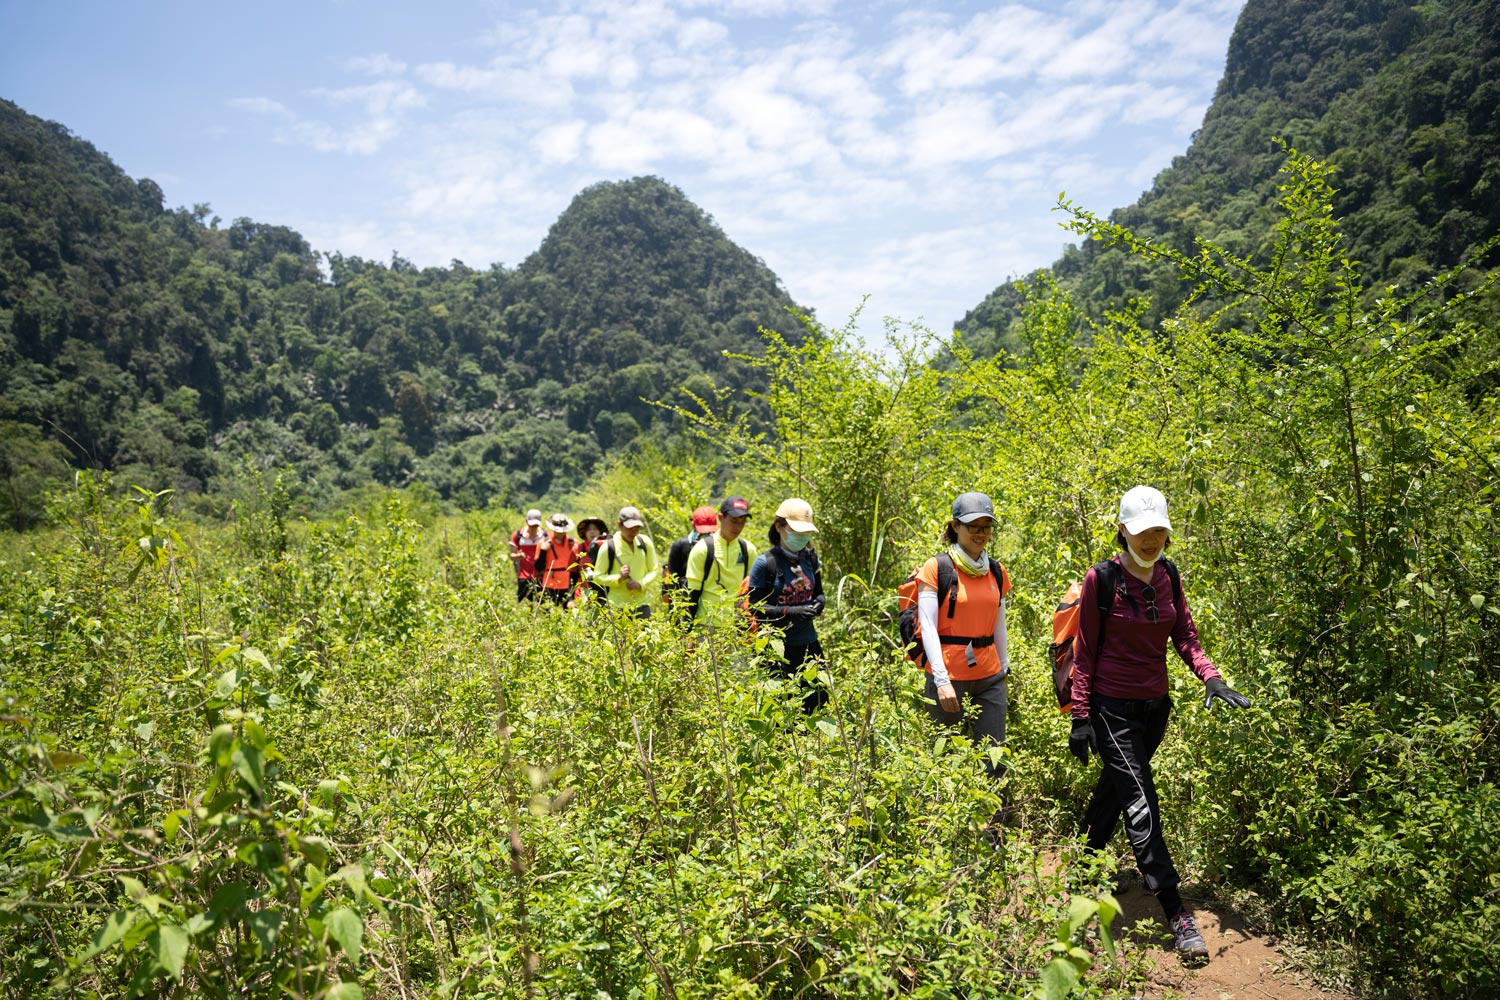 Vietnam offers a variety of hiking tours, ranging from scenic treks in the mountains to jungle adventures in national parks.